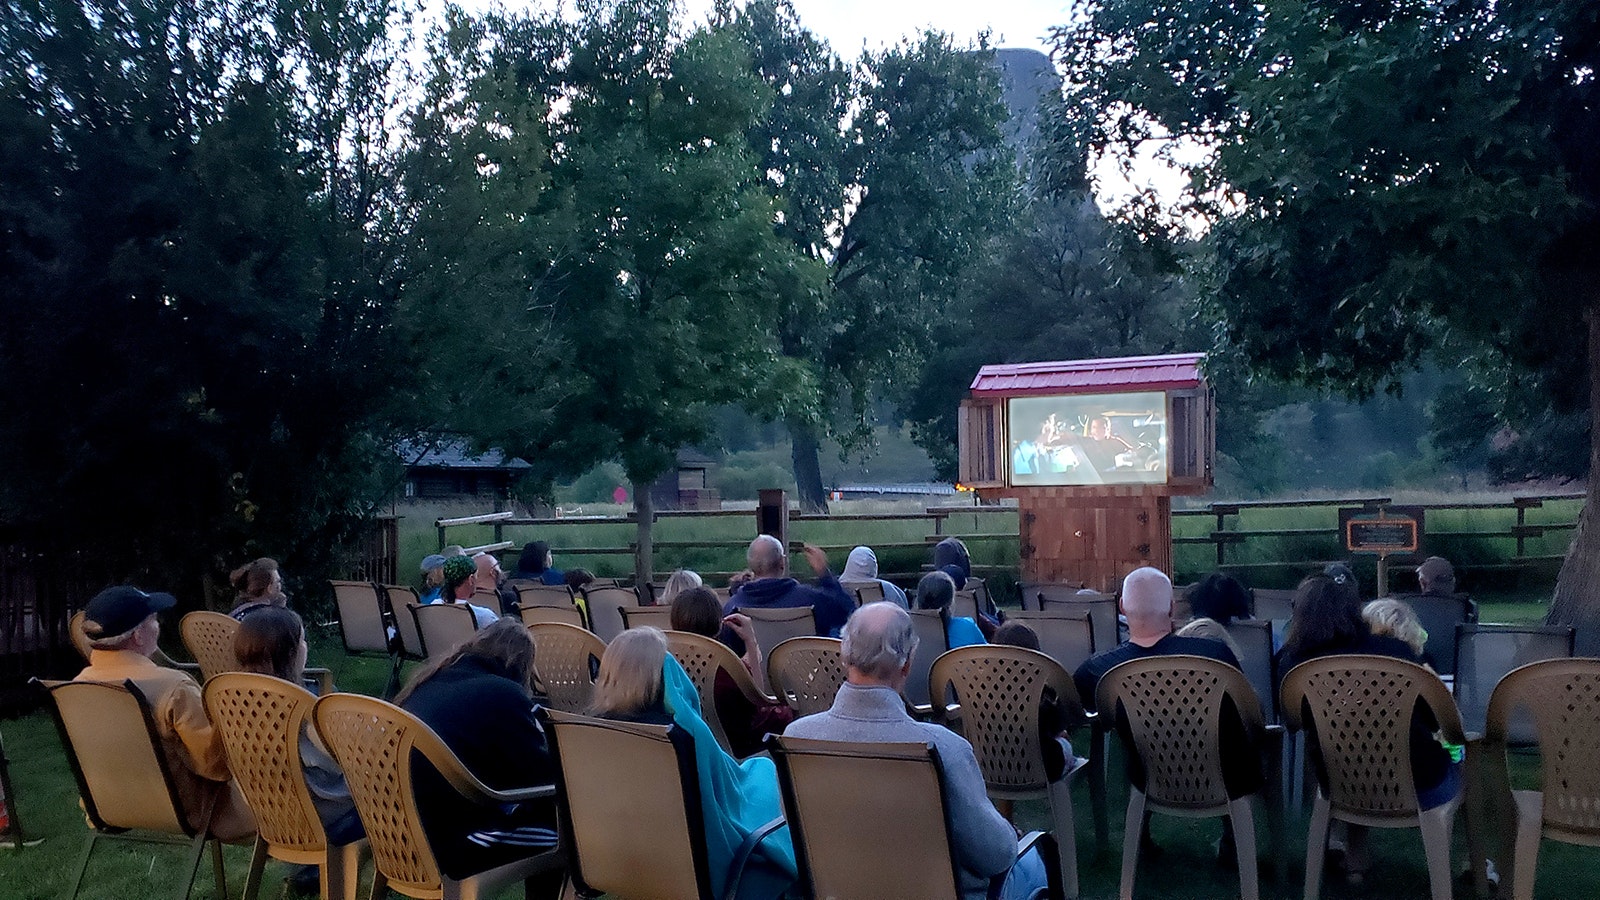 The movie "Close Encounters of the Third Kind" is shown every night at the Devils Tower KOA. The tower can be seen in the background as the movie plays.